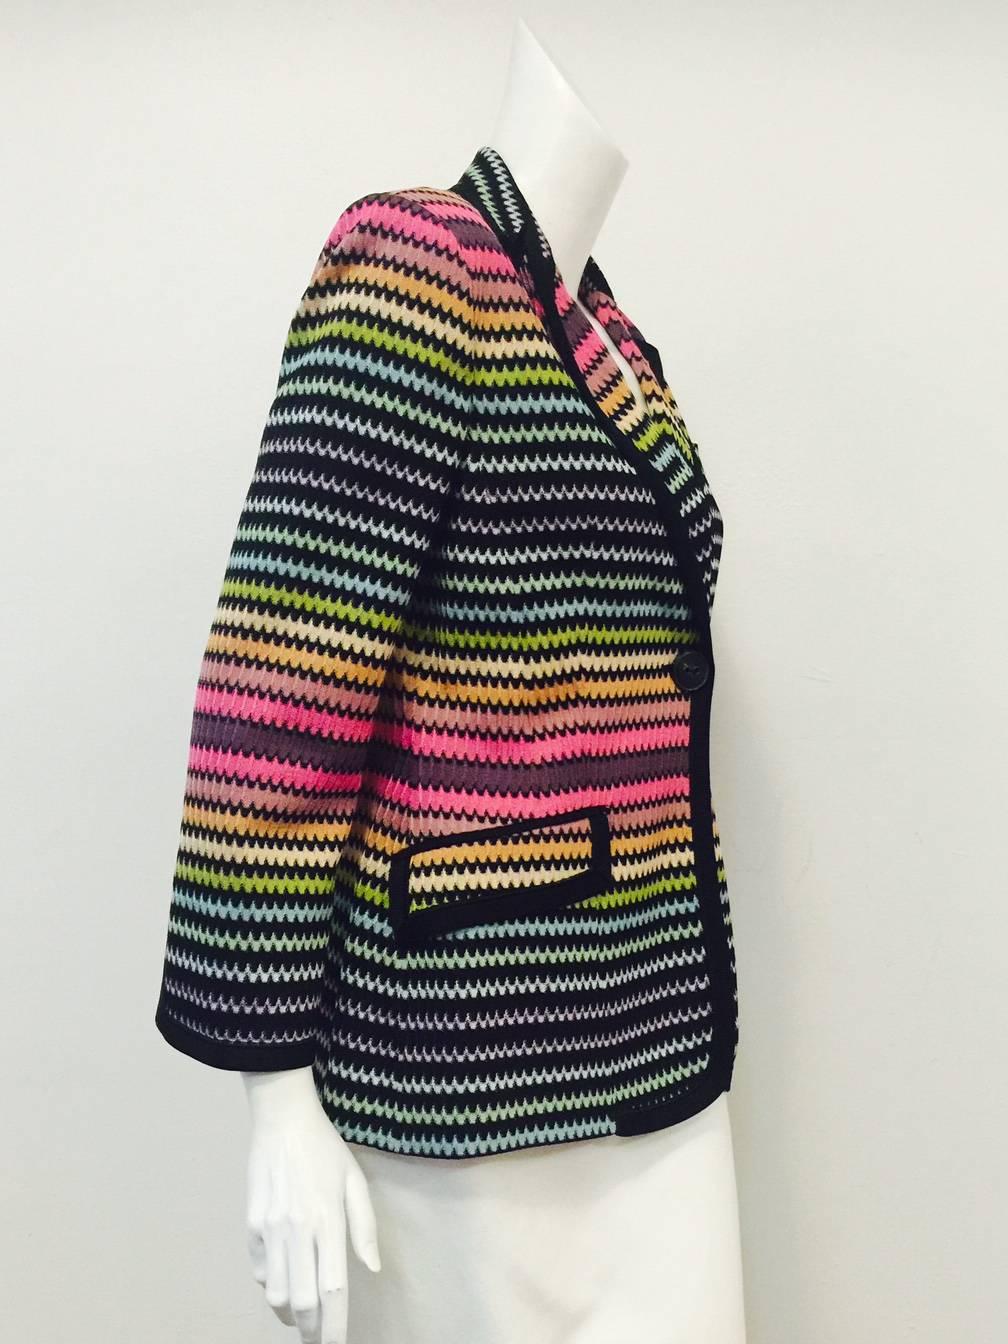 Missoni Multi-Colored Blazer is truly magnificent!  Features signature zig zag pattern knit, peaked lapels, flap pockets, and breast pocket.  Slit cuffs, solid black trim, single button closure and rear vent complete the look.  Fully lined in black